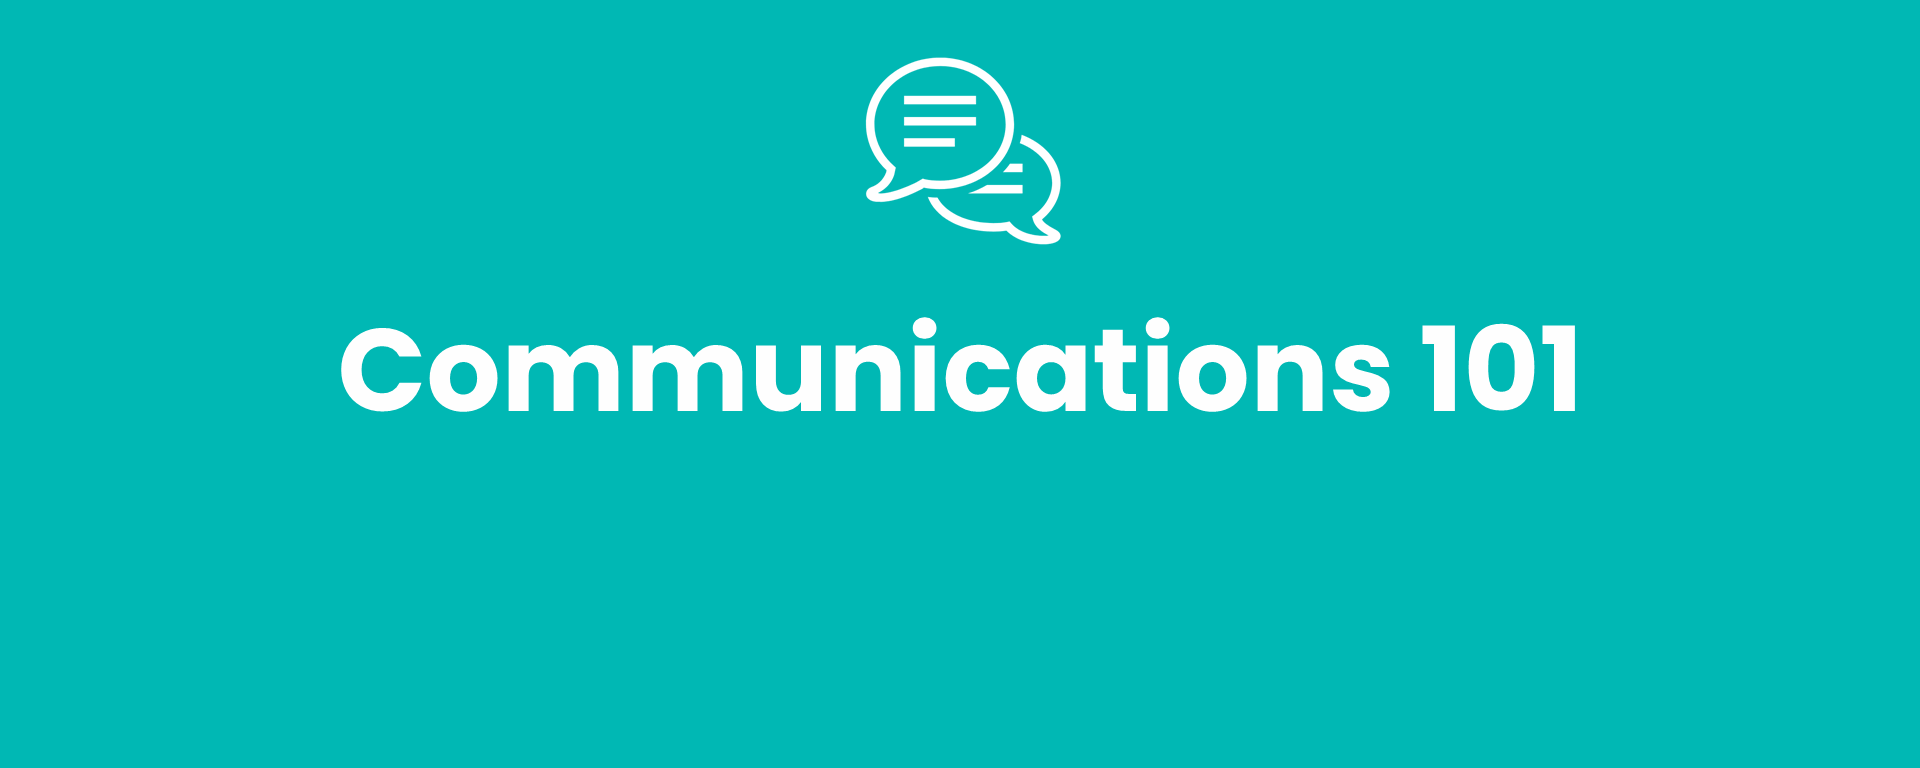 Communications 101 – Verbal and Written Standards